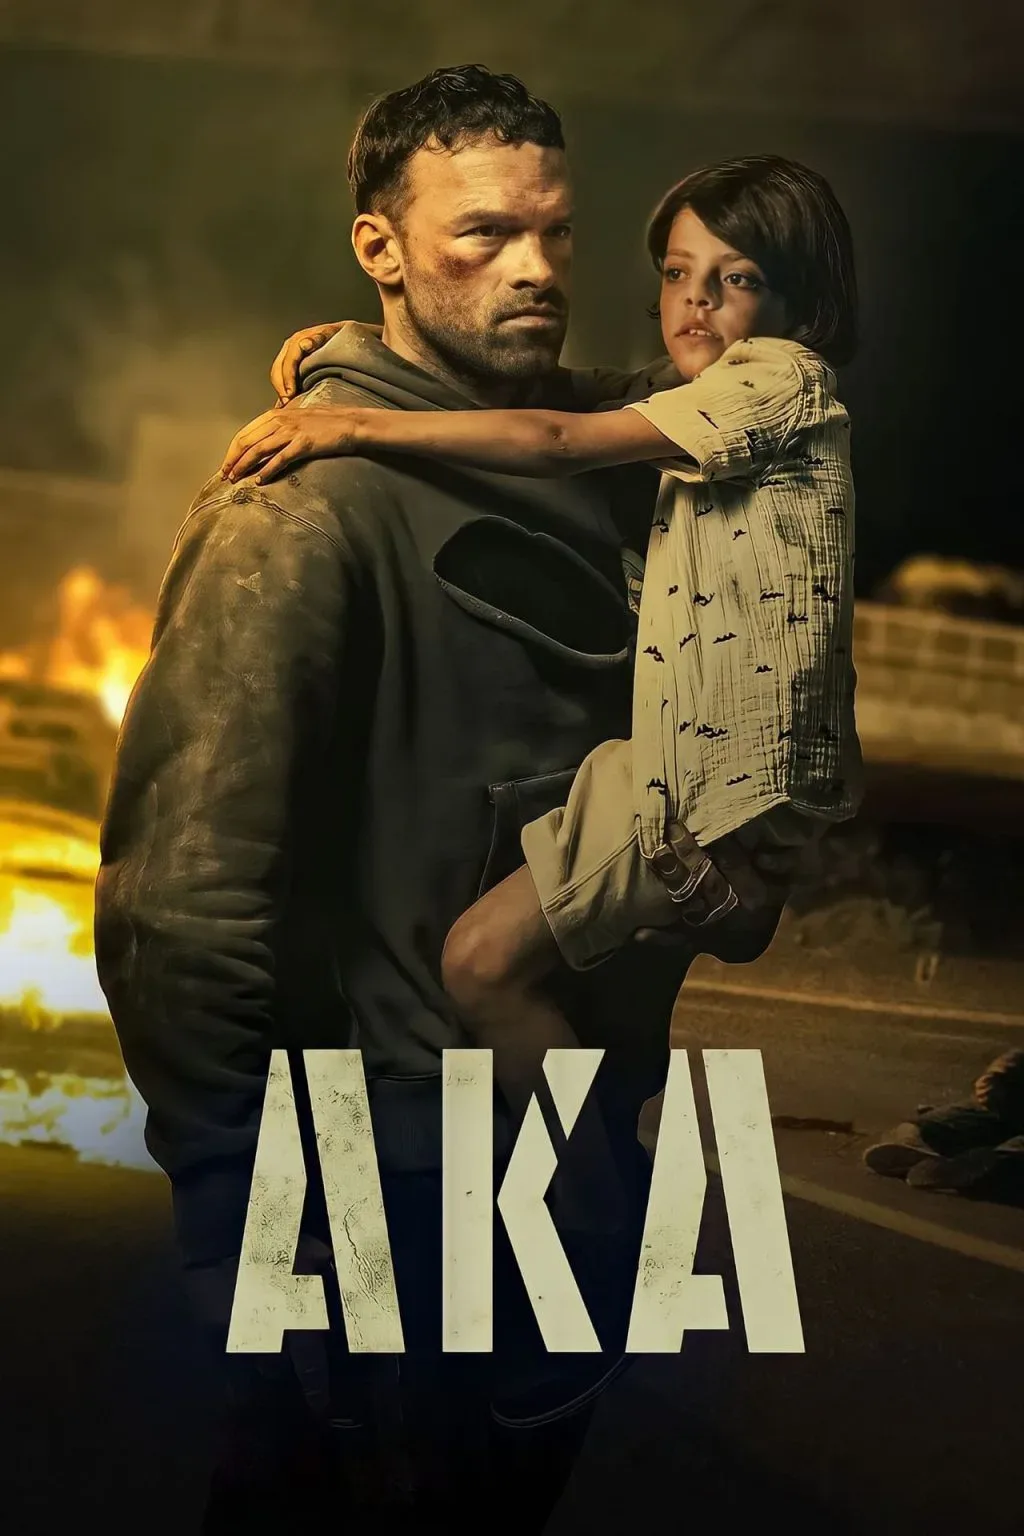 In the movie AKA - A steely special ops agent finds his morality put to the test when he infiltrates a crime syndicate and unexpectedly bonds with the boss’ young son.